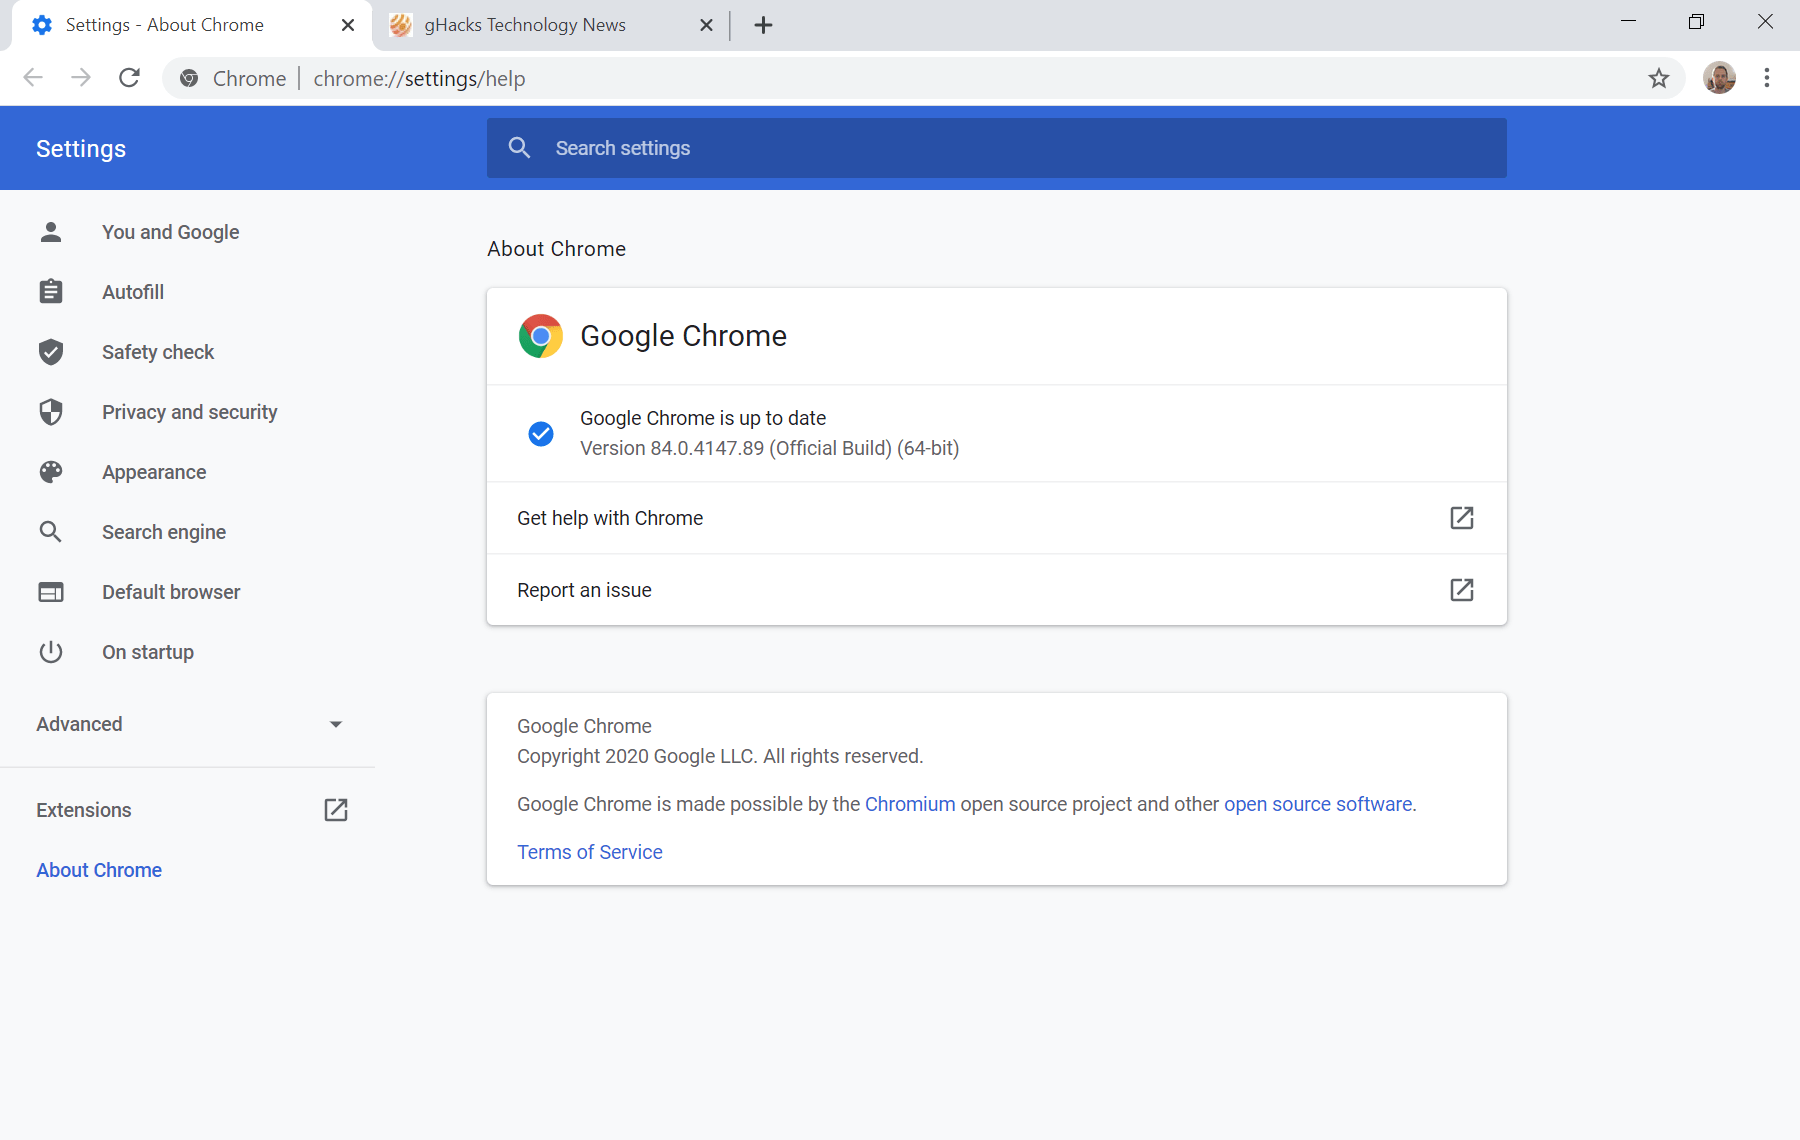 Google Chrome 84 is out with security patches